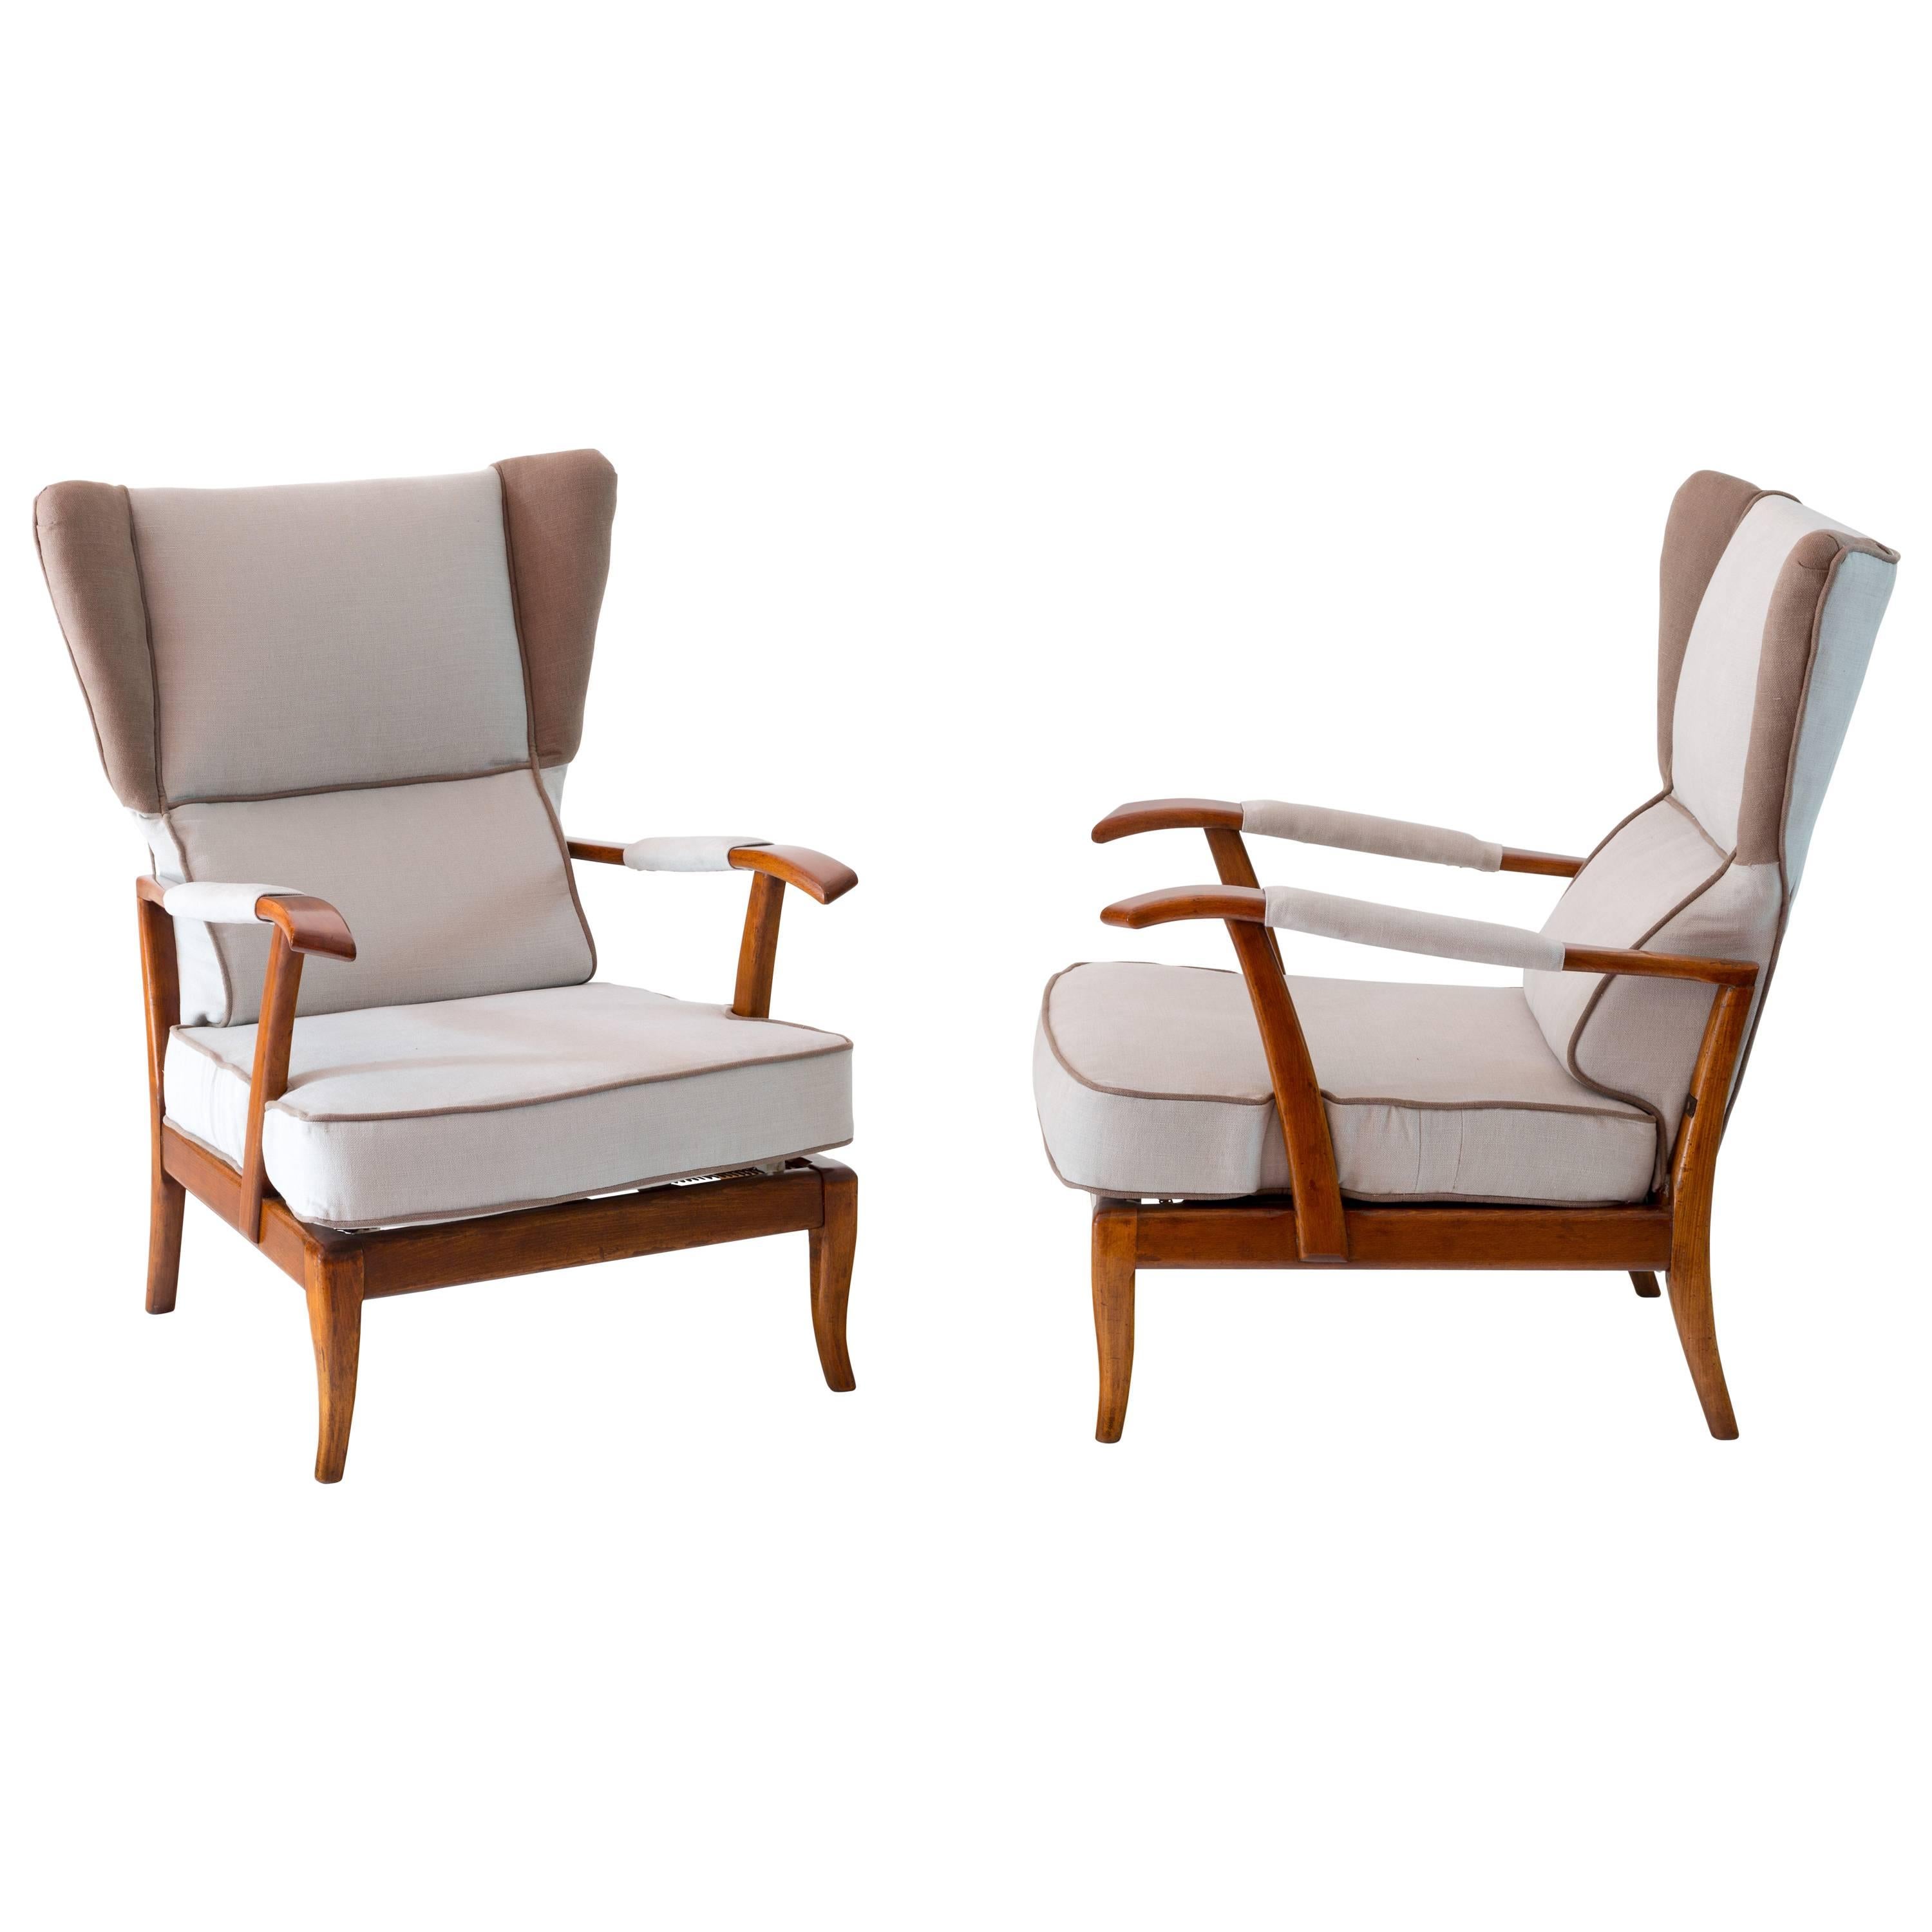 Interesting Pair of Reclining Wingback Armchairs by Paolo Buffa, 1940